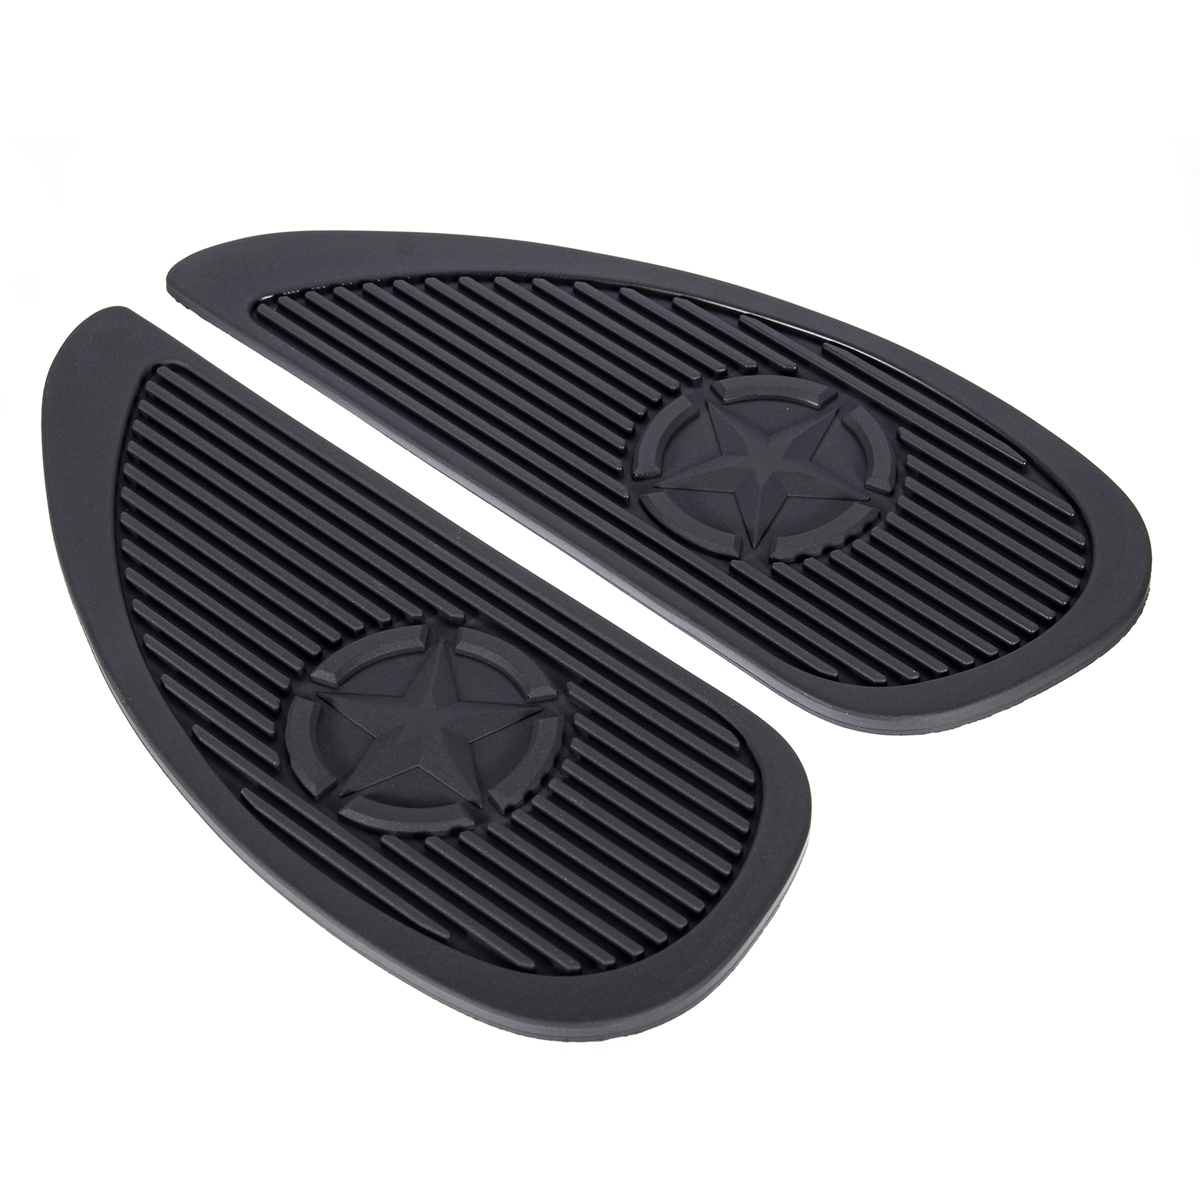 Pair Motorcycle Cafe Racer Fuel Tank Cap Pad Protector Rubber Decal Sticker Universal